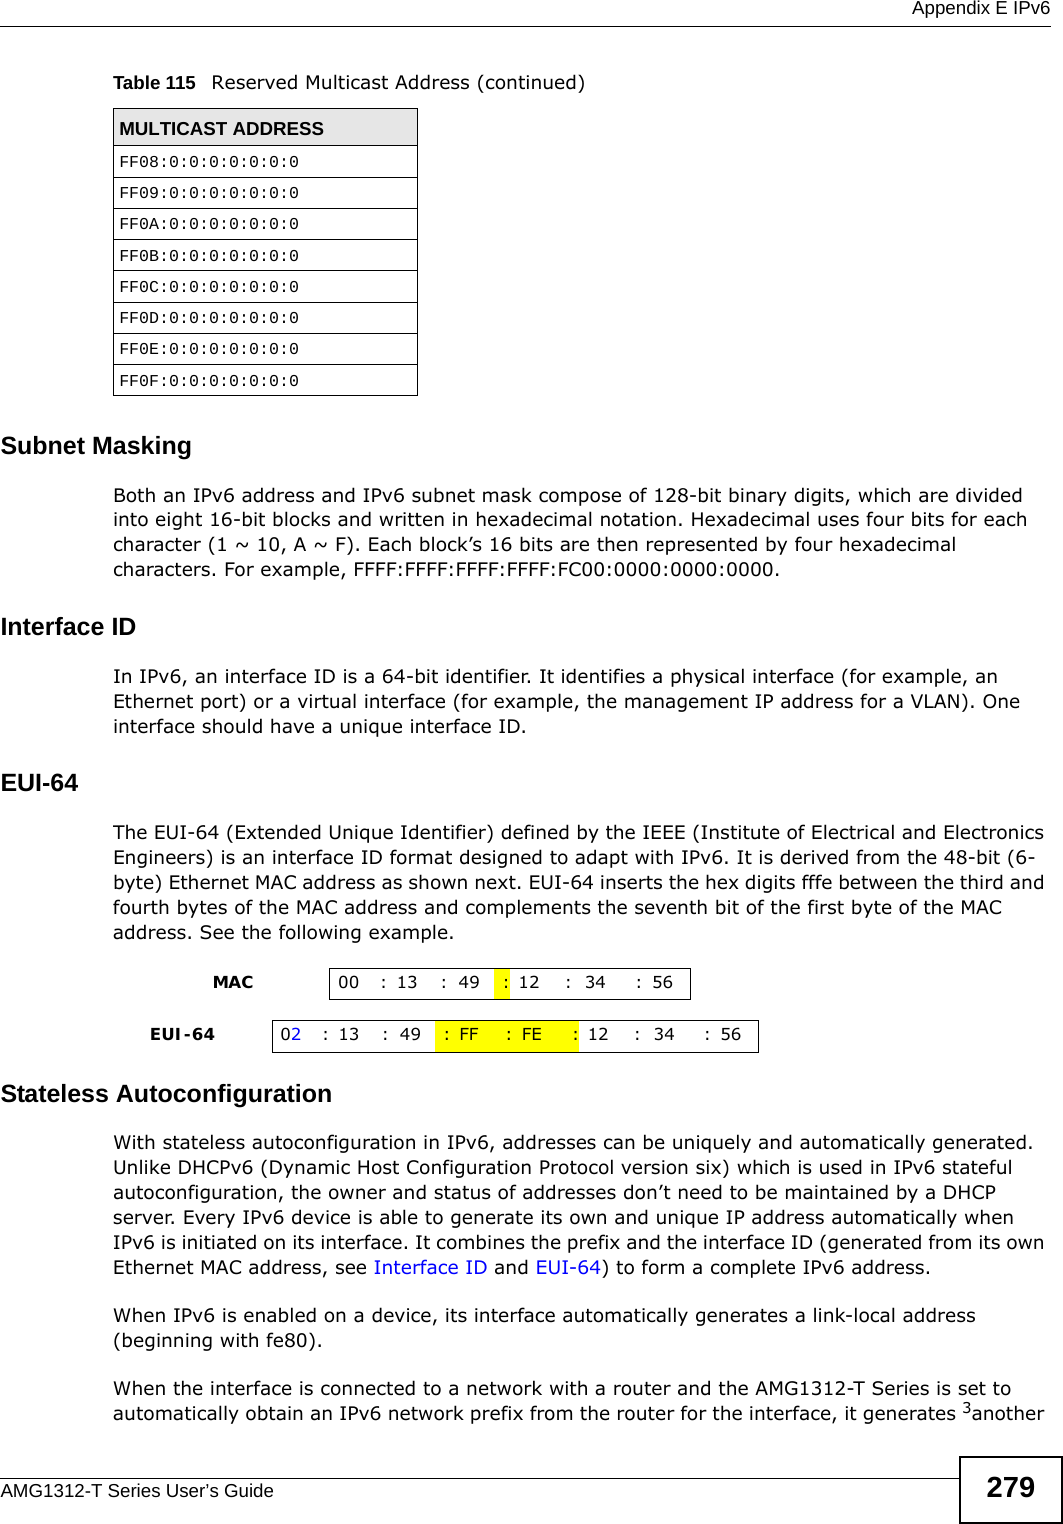  Appendix E IPv6AMG1312-T Series User’s Guide 279Subnet MaskingBoth an IPv6 address and IPv6 subnet mask compose of 128-bit binary digits, which are divided into eight 16-bit blocks and written in hexadecimal notation. Hexadecimal uses four bits for each character (1 ~ 10, A ~ F). Each block’s 16 bits are then represented by four hexadecimal characters. For example, FFFF:FFFF:FFFF:FFFF:FC00:0000:0000:0000.Interface IDIn IPv6, an interface ID is a 64-bit identifier. It identifies a physical interface (for example, an Ethernet port) or a virtual interface (for example, the management IP address for a VLAN). One interface should have a unique interface ID.EUI-64The EUI-64 (Extended Unique Identifier) defined by the IEEE (Institute of Electrical and Electronics Engineers) is an interface ID format designed to adapt with IPv6. It is derived from the 48-bit (6-byte) Ethernet MAC address as shown next. EUI-64 inserts the hex digits fffe between the third and fourth bytes of the MAC address and complements the seventh bit of the first byte of the MAC address. See the following example. Stateless AutoconfigurationWith stateless autoconfiguration in IPv6, addresses can be uniquely and automatically generated. Unlike DHCPv6 (Dynamic Host Configuration Protocol version six) which is used in IPv6 stateful autoconfiguration, the owner and status of addresses don’t need to be maintained by a DHCP server. Every IPv6 device is able to generate its own and unique IP address automatically when IPv6 is initiated on its interface. It combines the prefix and the interface ID (generated from its own Ethernet MAC address, see Interface ID and EUI-64) to form a complete IPv6 address.When IPv6 is enabled on a device, its interface automatically generates a link-local address (beginning with fe80).When the interface is connected to a network with a router and the AMG1312-T Series is set to automatically obtain an IPv6 network prefix from the router for the interface, it generates 3another FF08:0:0:0:0:0:0:0FF09:0:0:0:0:0:0:0FF0A:0:0:0:0:0:0:0FF0B:0:0:0:0:0:0:0FF0C:0:0:0:0:0:0:0FF0D:0:0:0:0:0:0:0FF0E:0:0:0:0:0:0:0FF0F:0:0:0:0:0:0:0Table 115   Reserved Multicast Address (continued)MULTICAST ADDRESS                MAC 00 : 13 : 49 :12 : 34 :56     EUI-64 02:13 :49 :FF :FE :12 : 34 :56